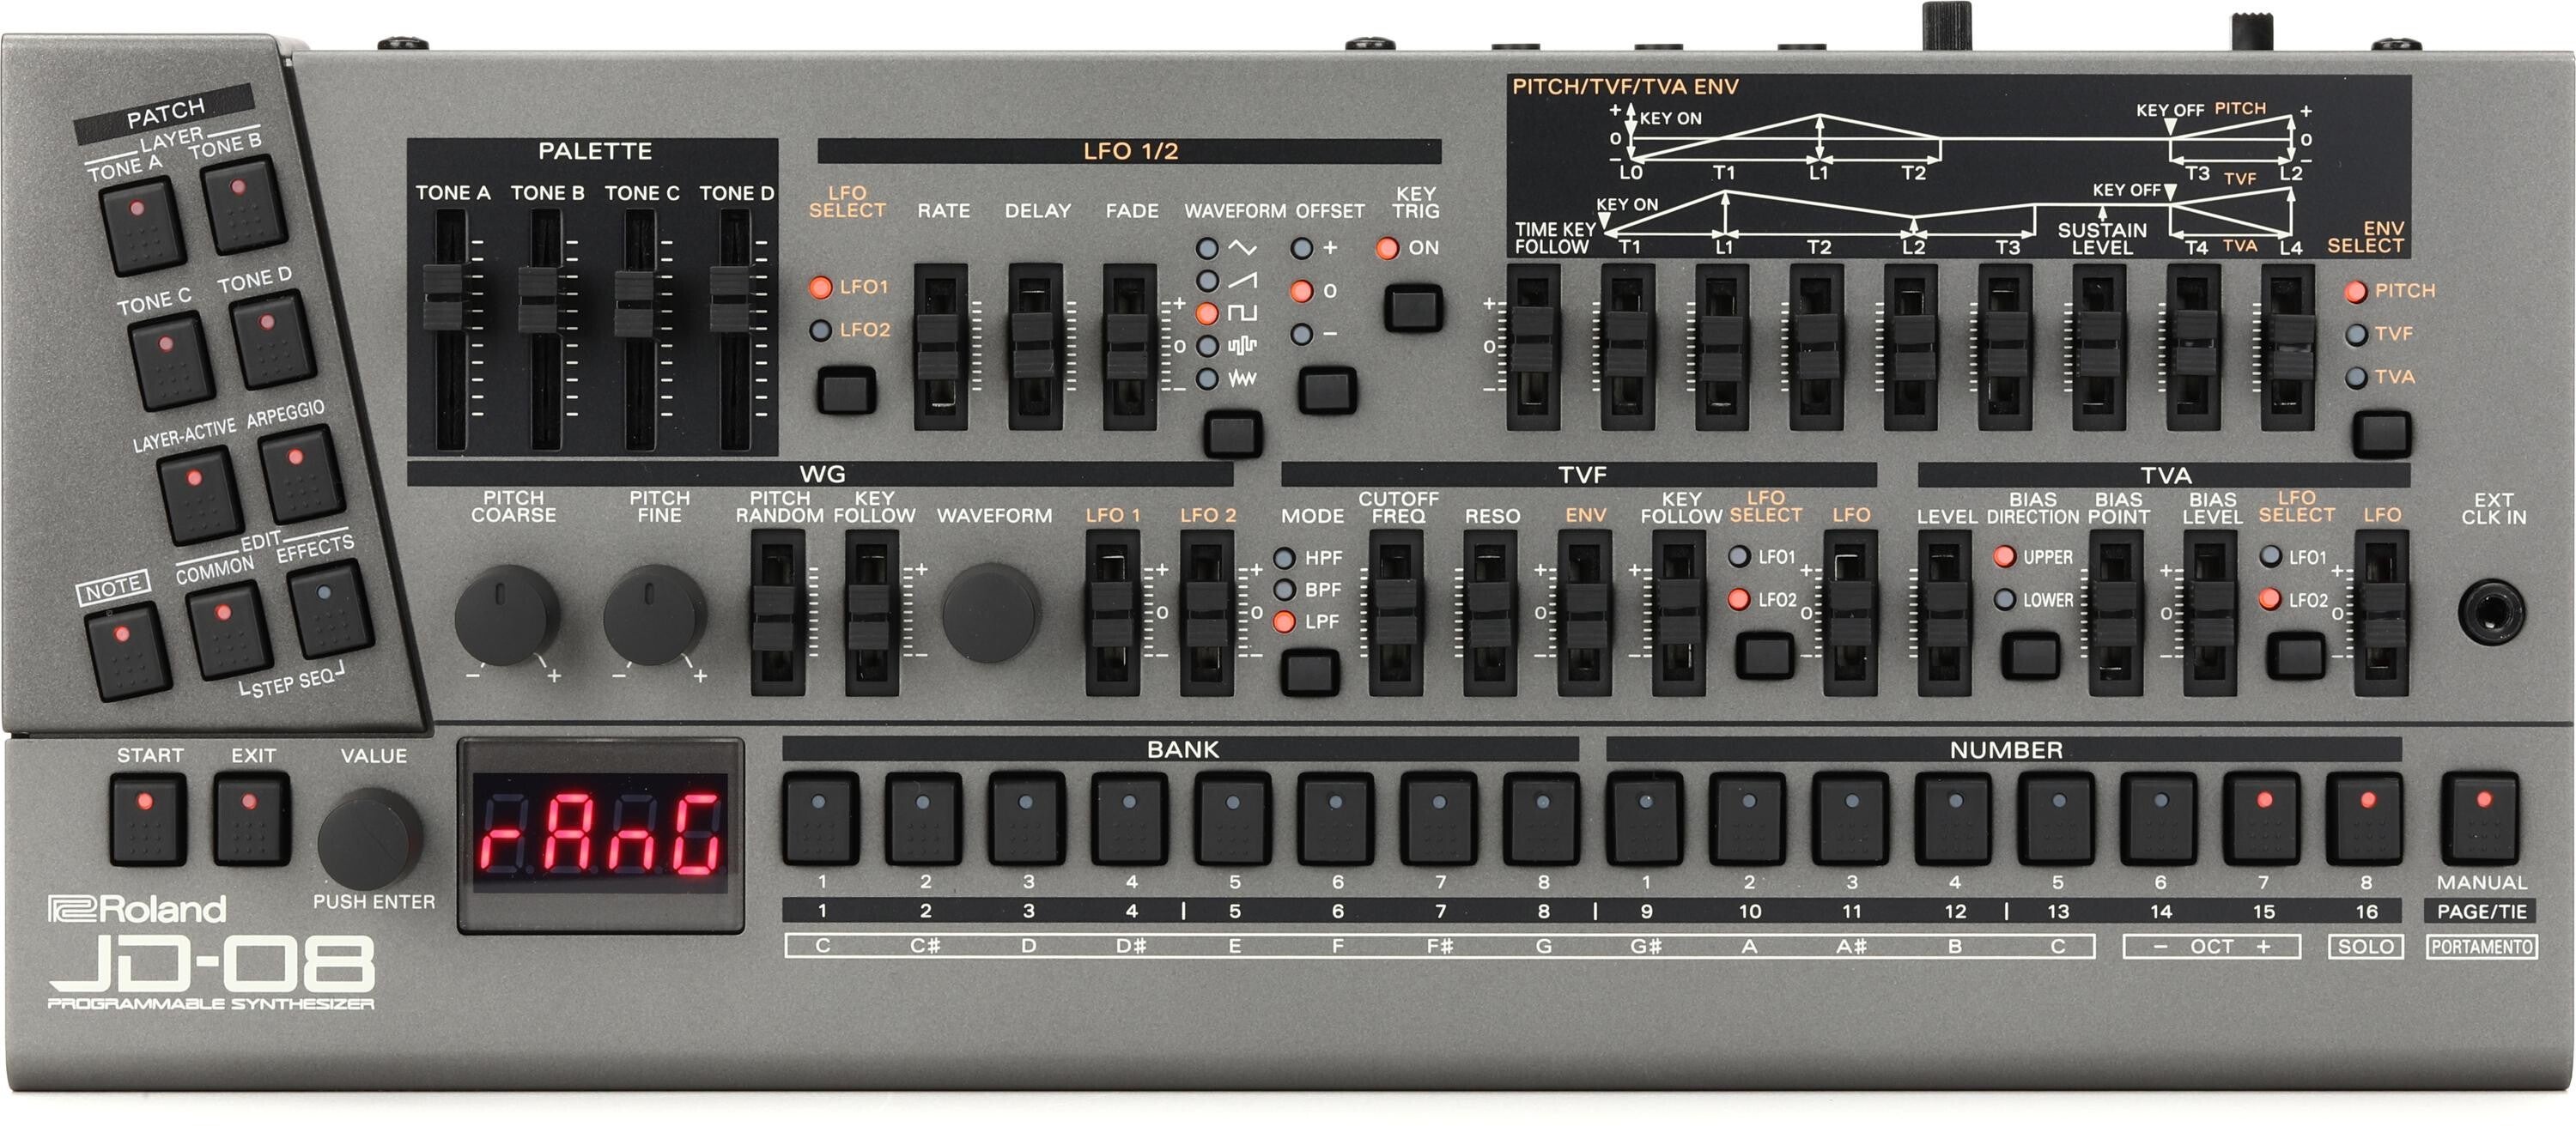 Roland JD-08 Boutique Series JD-800 Sound Module Reviews | Sweetwater